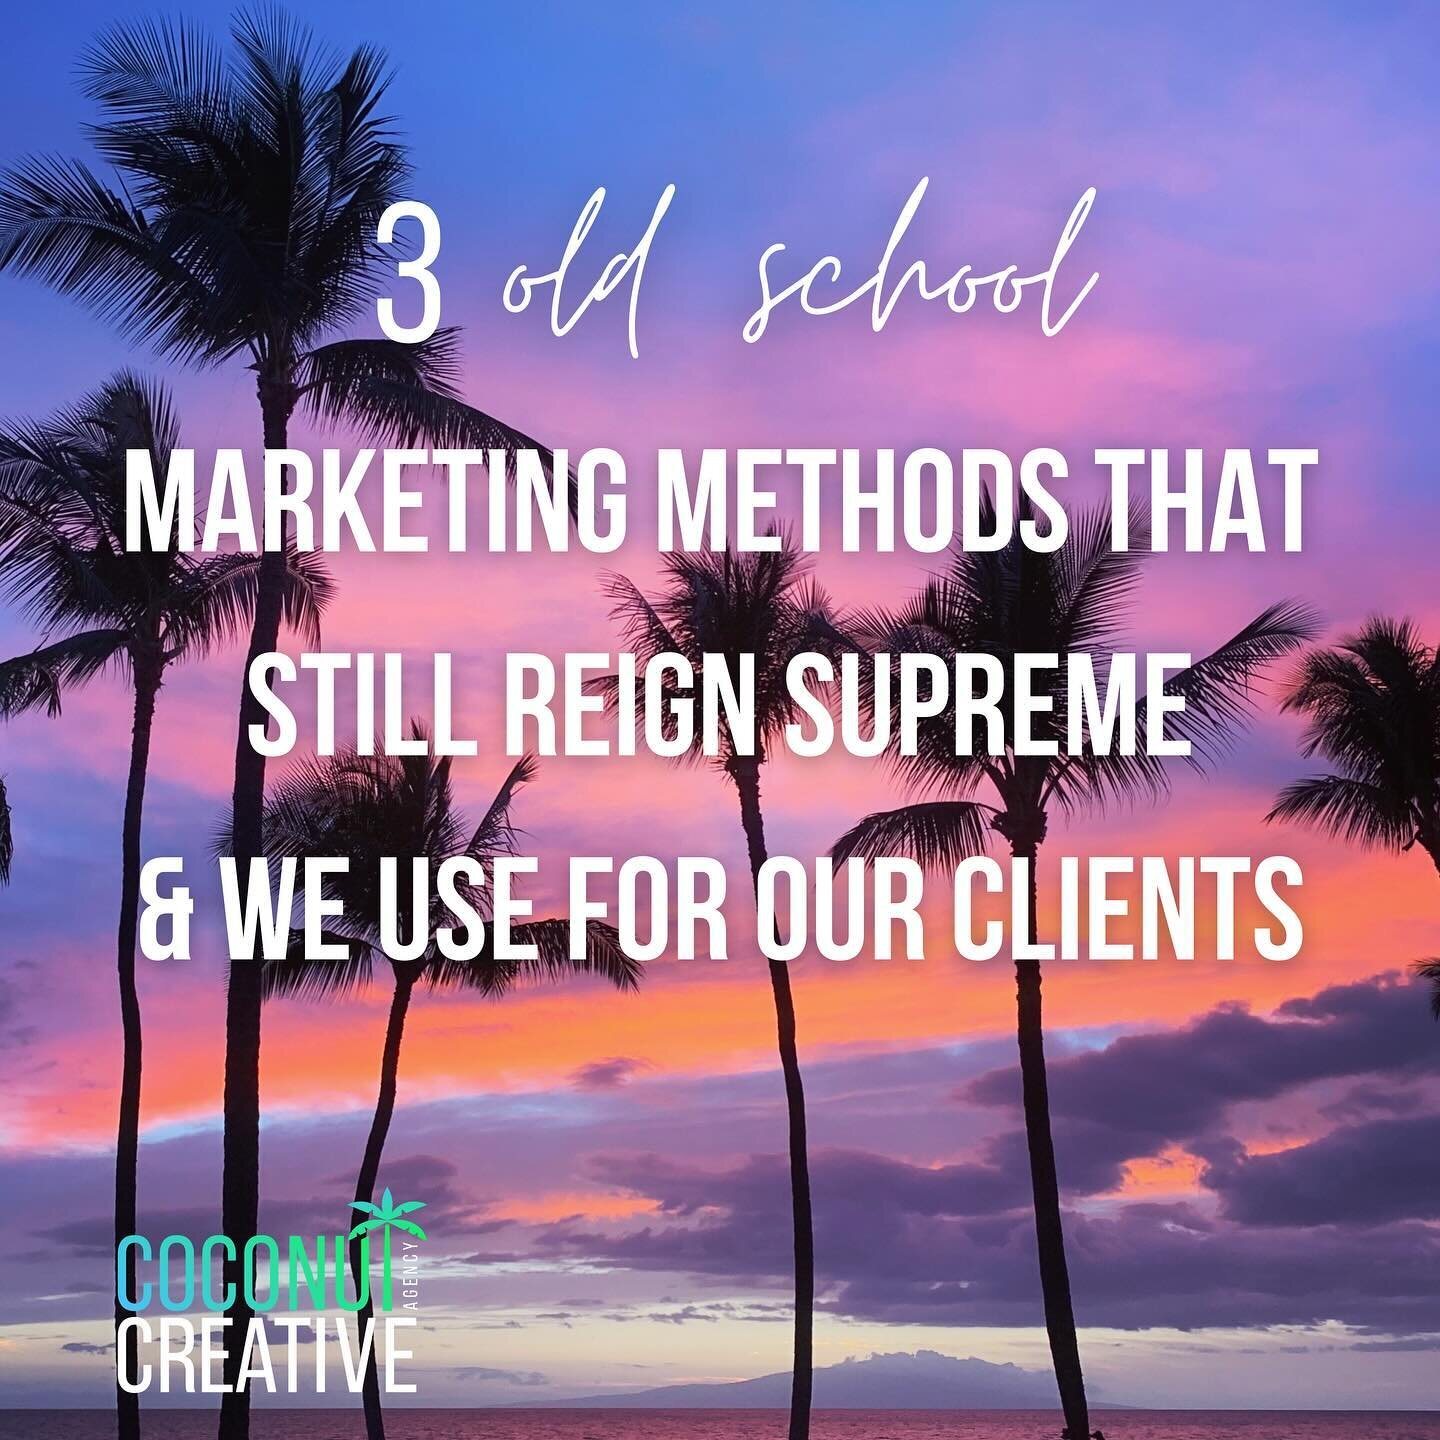 POV: you&rsquo;re obsessed with opening the right doors for your clients. 

You&rsquo;re unique. Your marketing strategy should reflect that.

- Ashley @coconutcreative.agency 

#oldschoolmarketing #howtogetclients #howtogetmoresales #cocoabeachflori